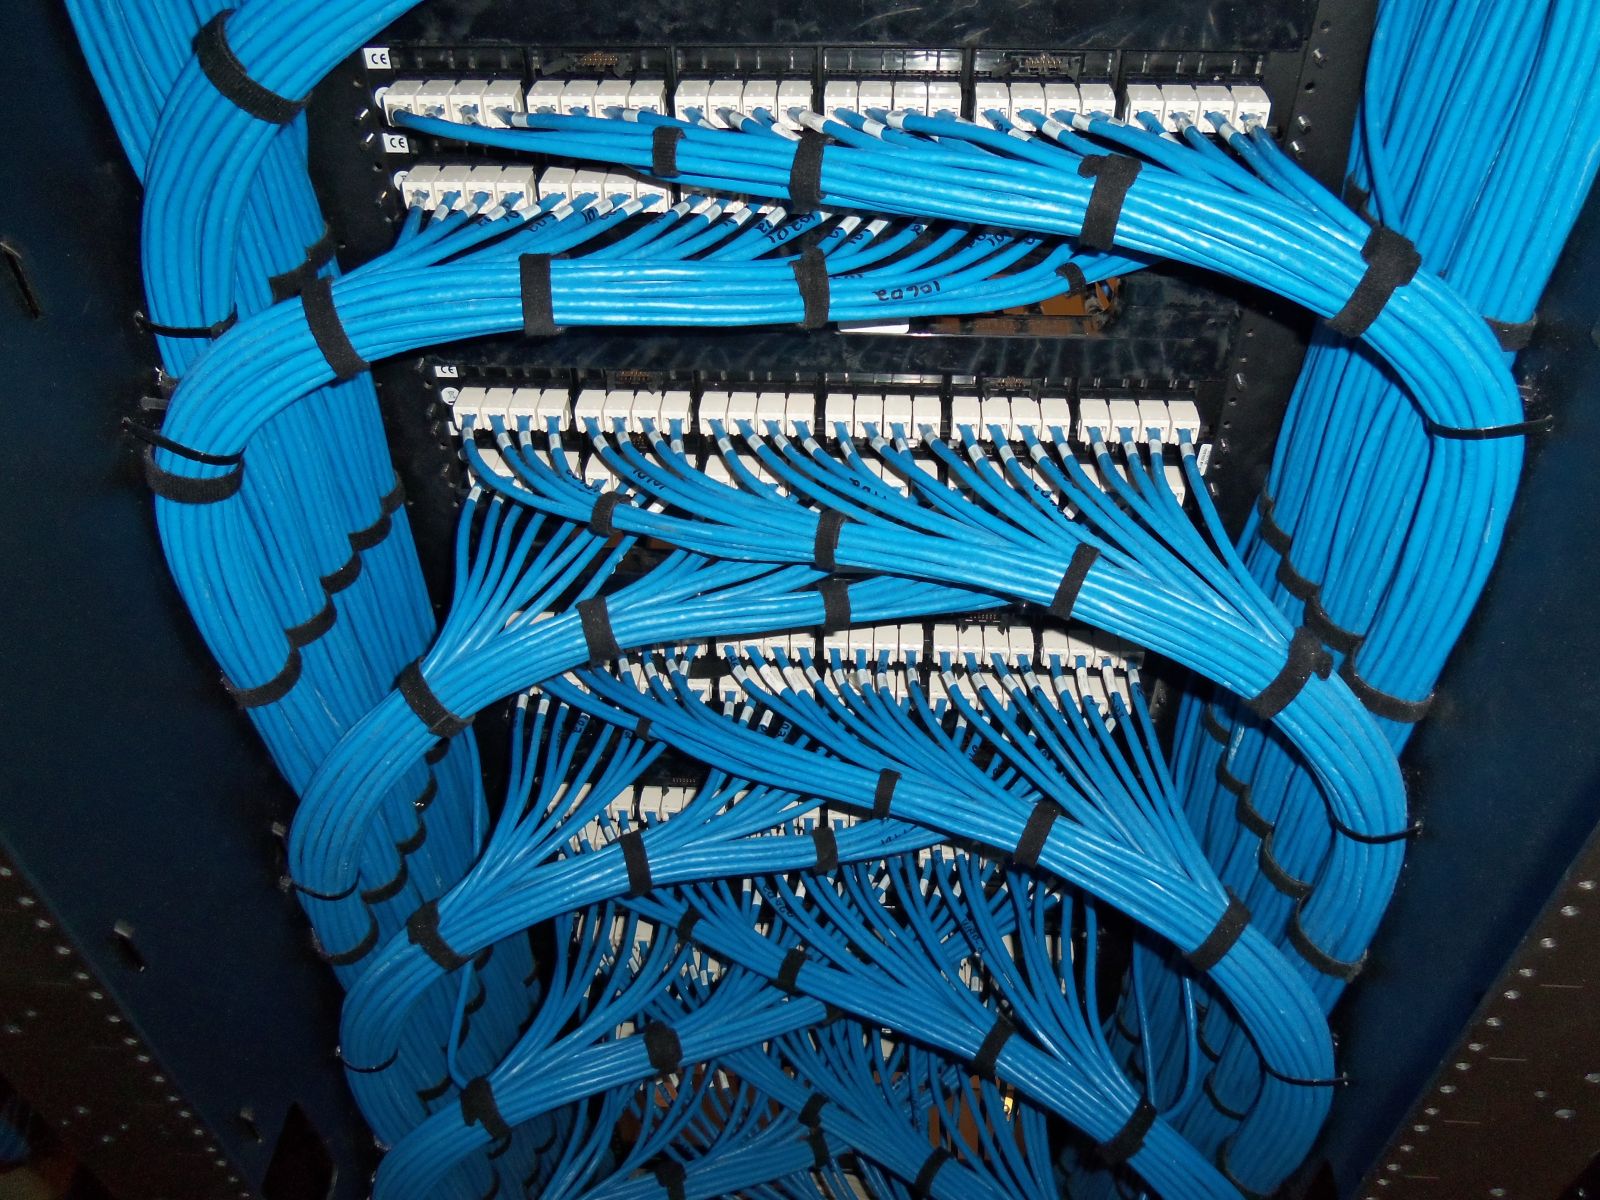 Network cabling done properly